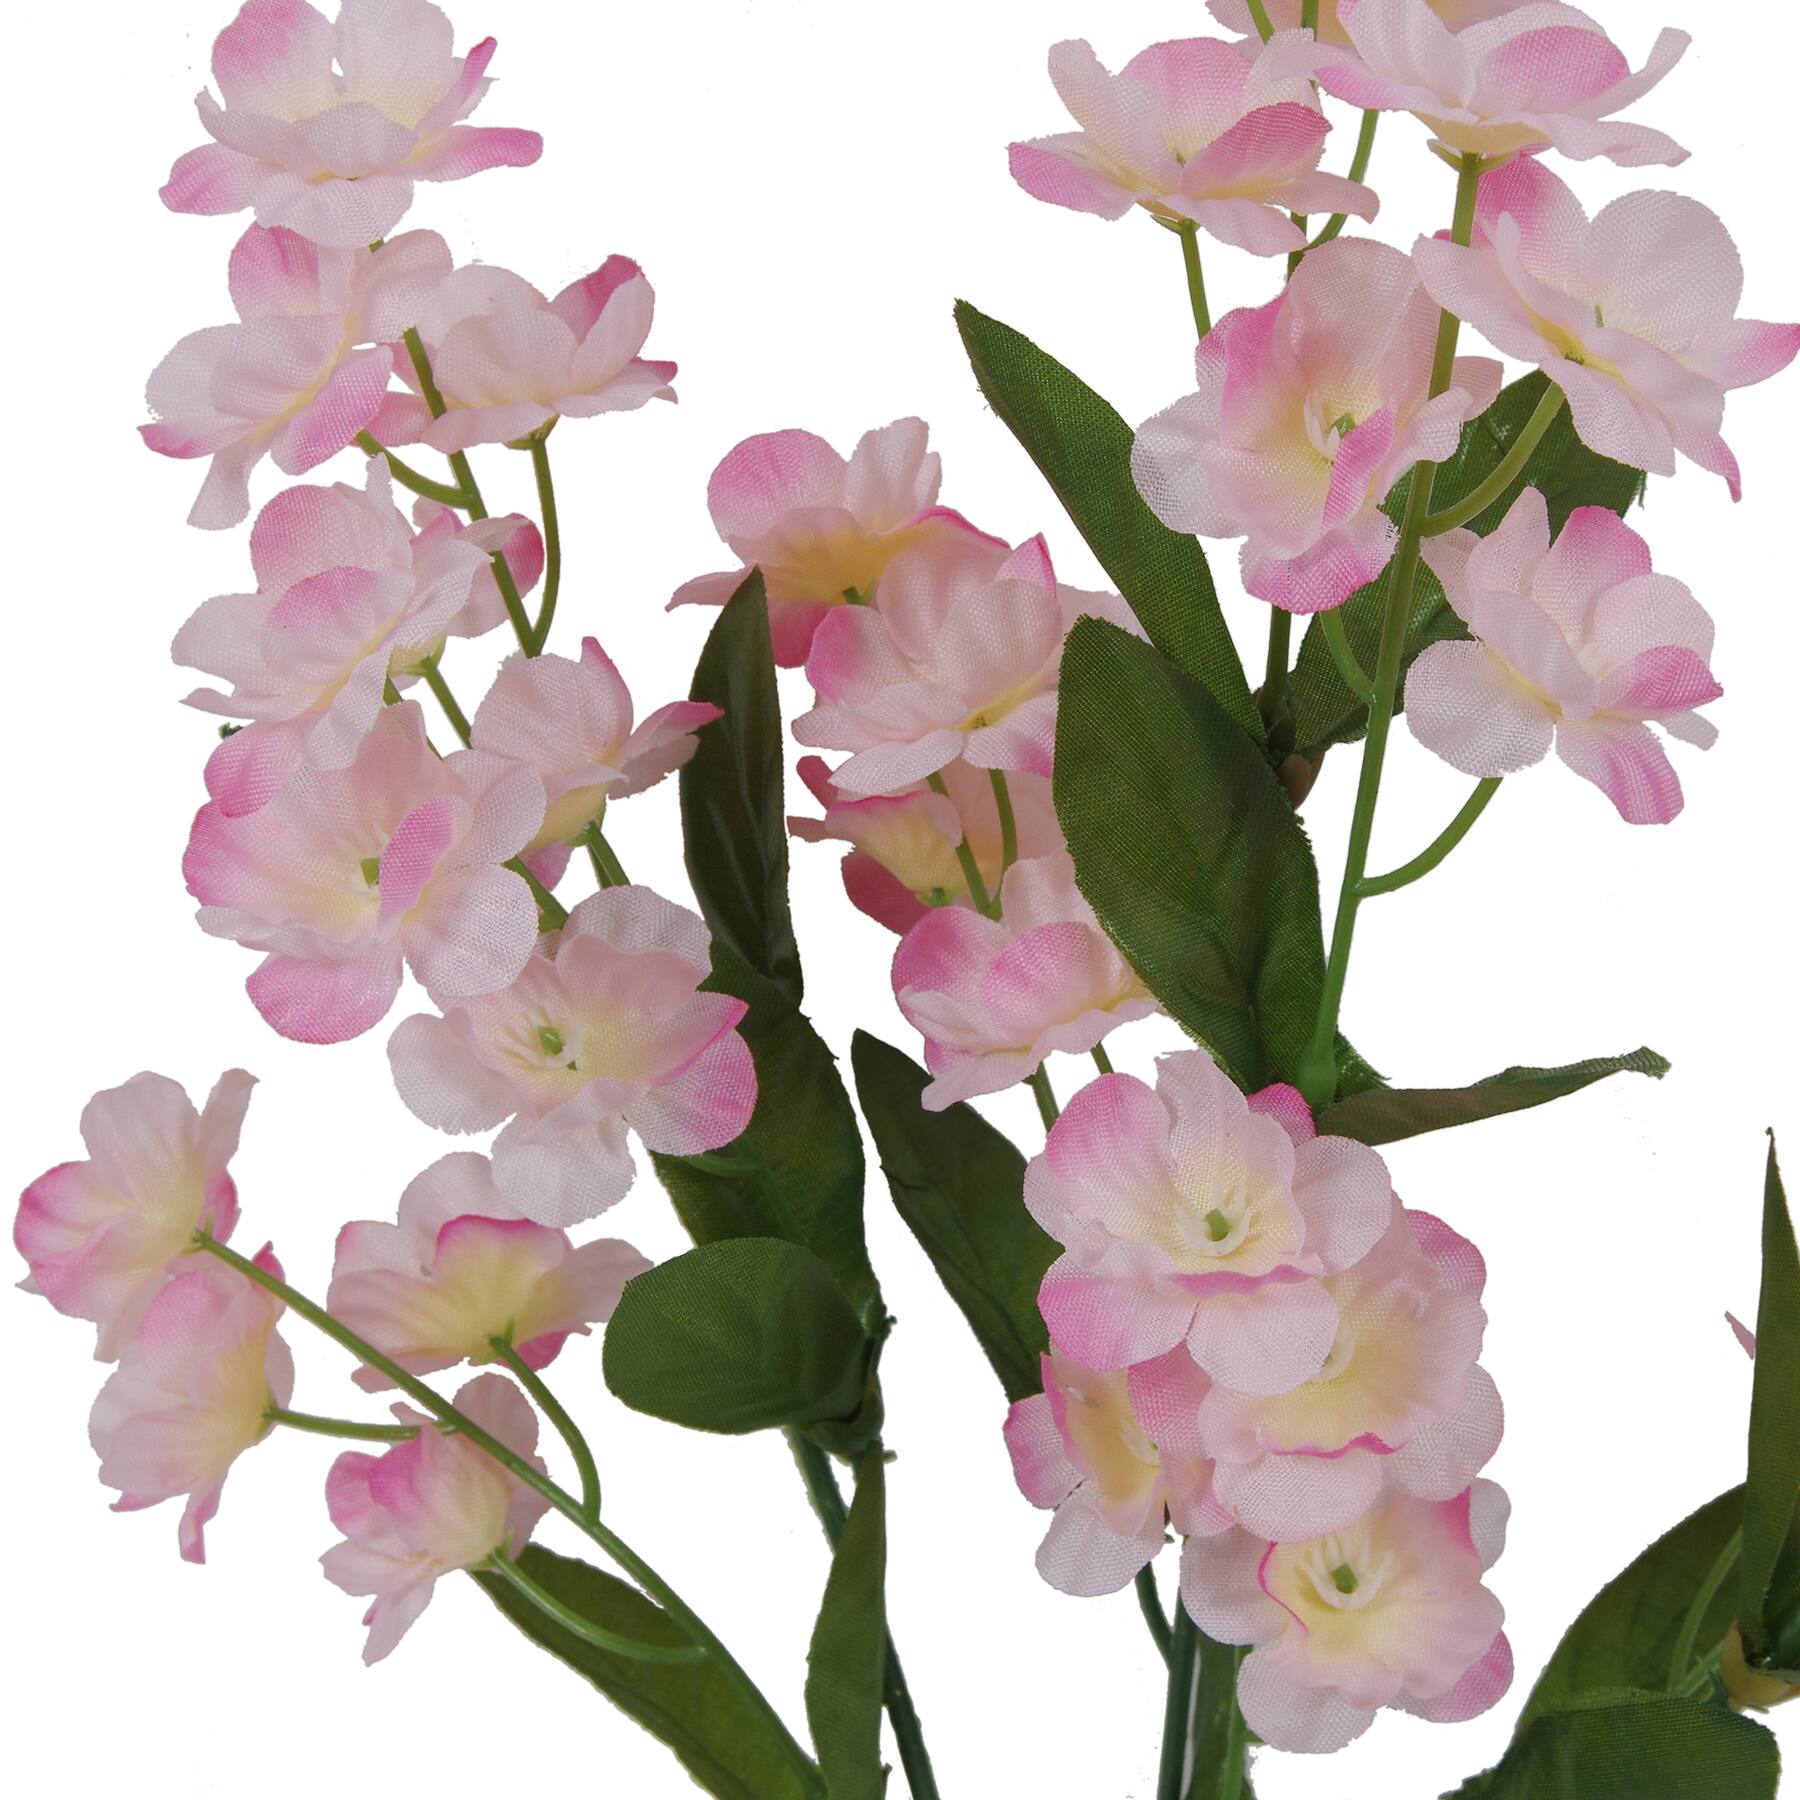 Buy the Pink Double Ruffled Baby's Breath Stem by Ashland® at Michaels